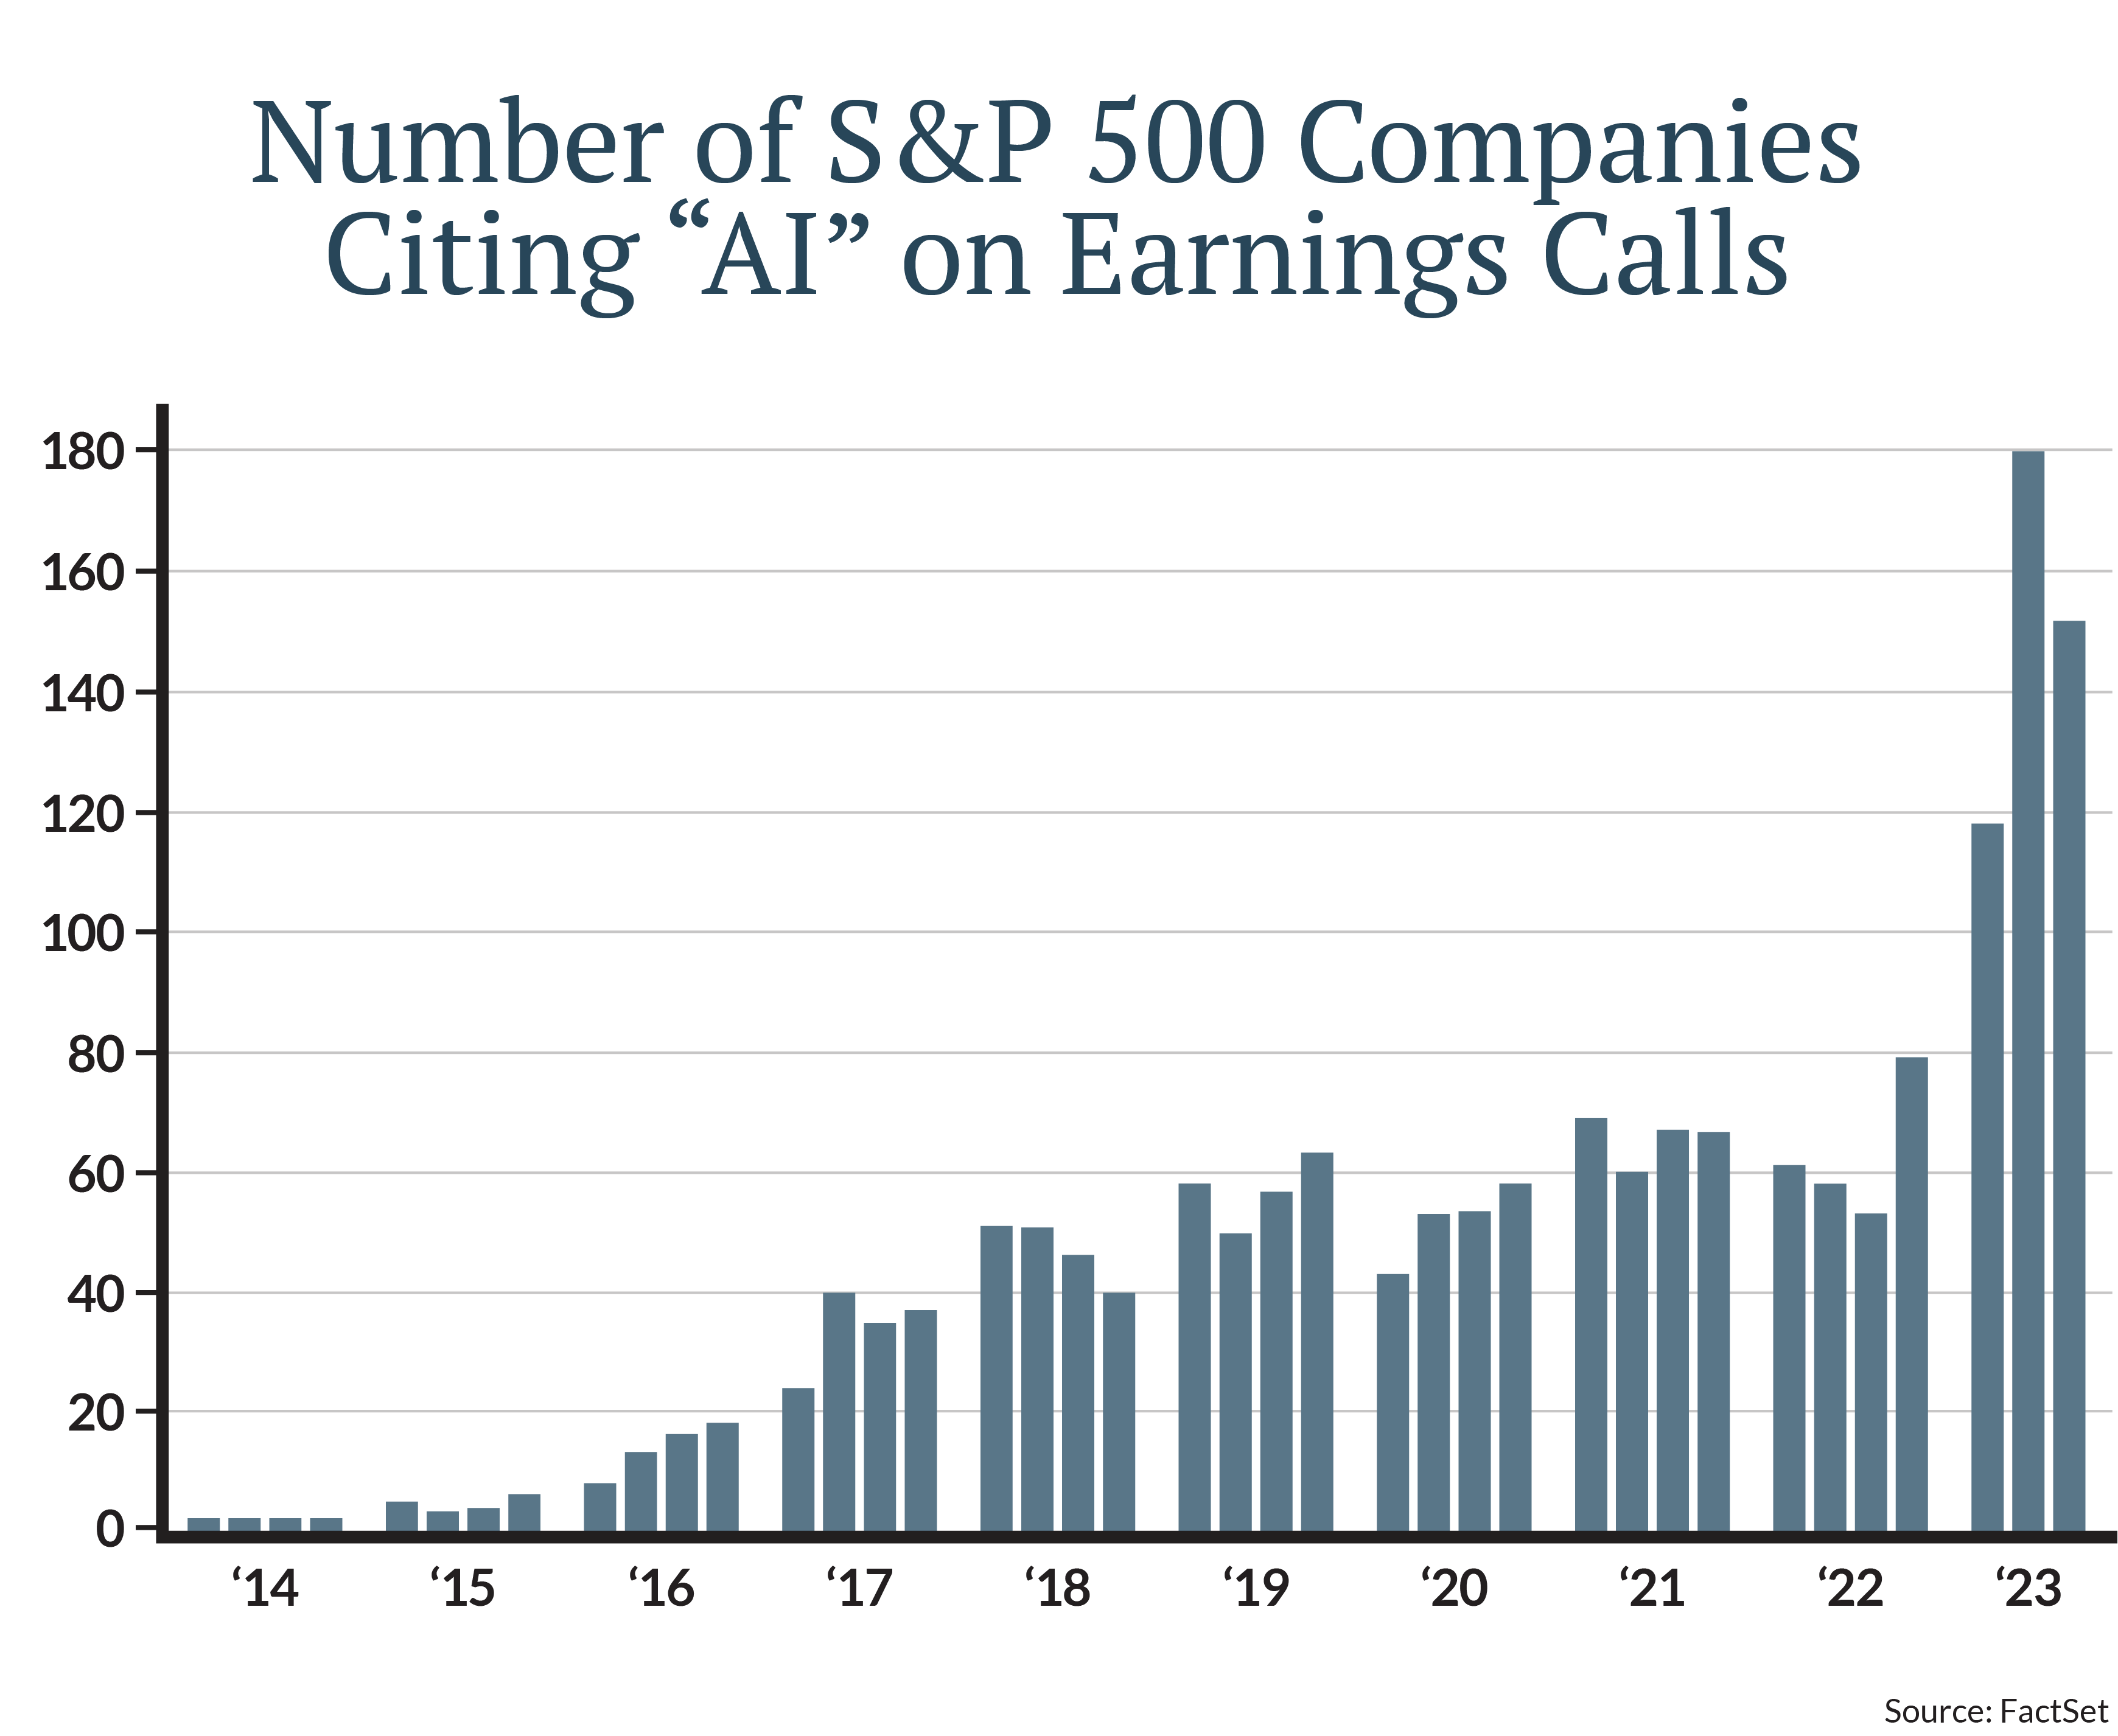 Number of S&P 500 Companies Citing AI on Earnings Calls